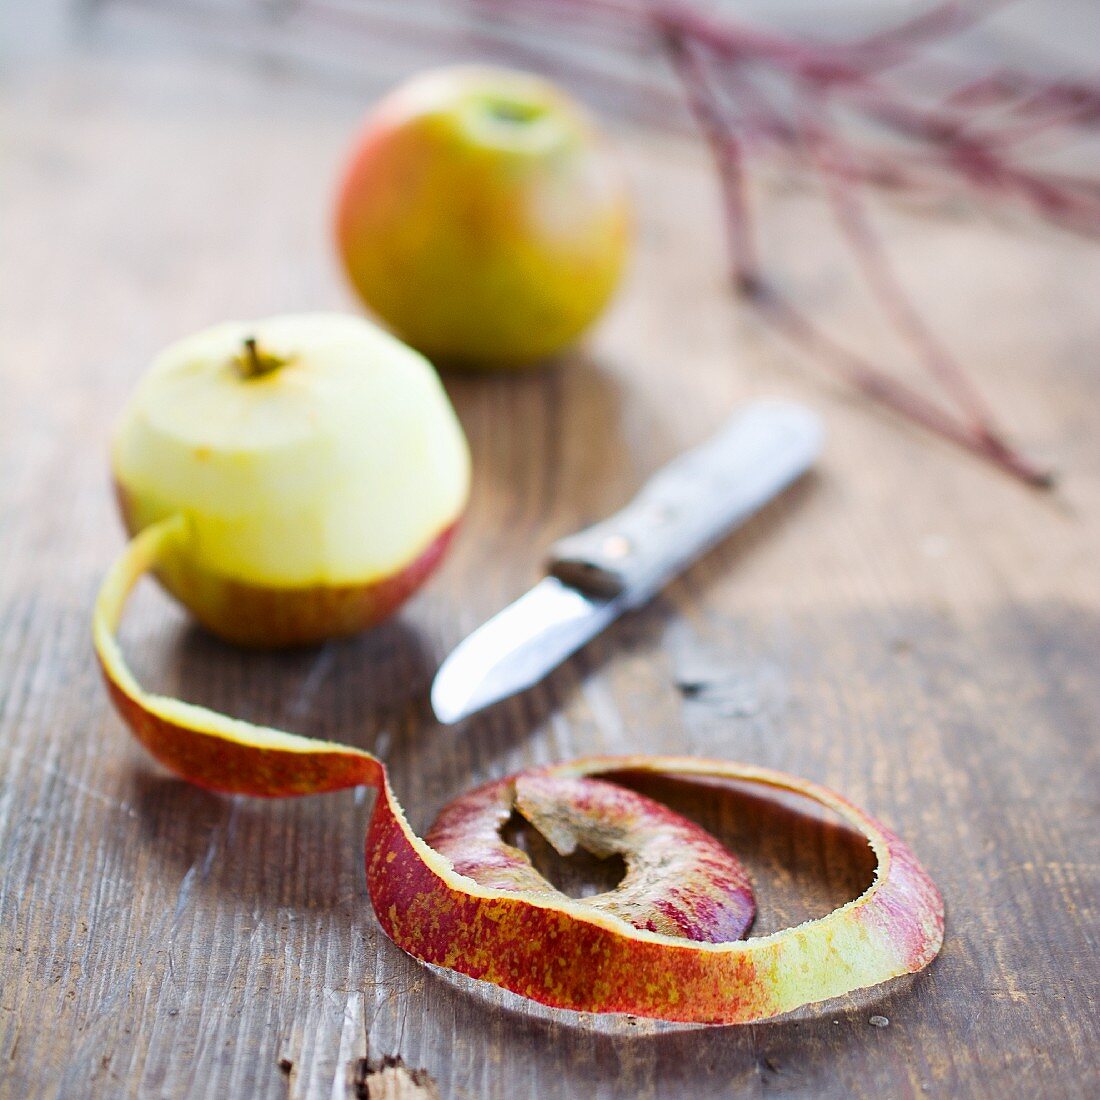 Apples, one partially peeled, on a wooden table